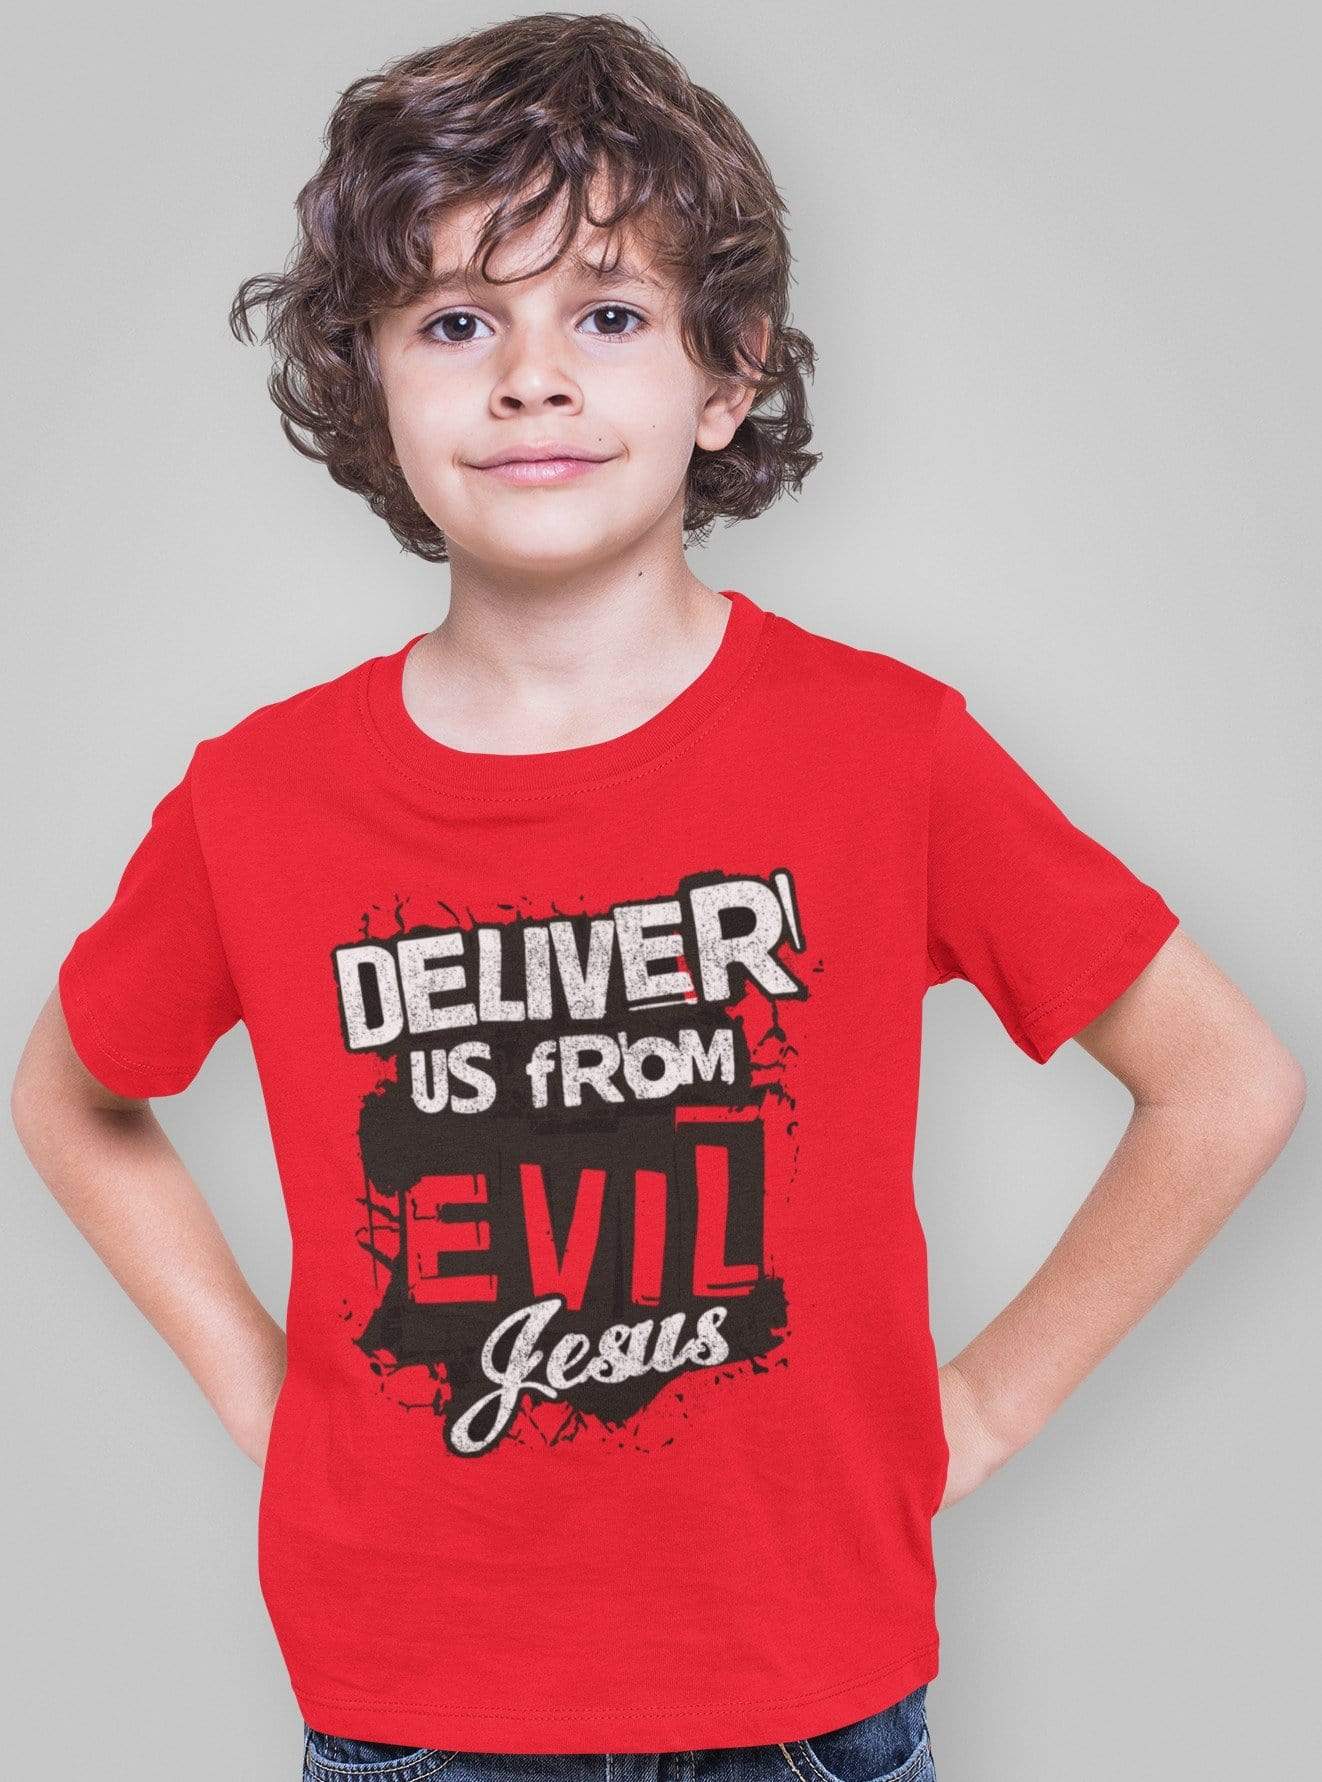 Living Words Kids Round Neck T Shirt Boy / 0-12 Mn / Red Deliver us from evil